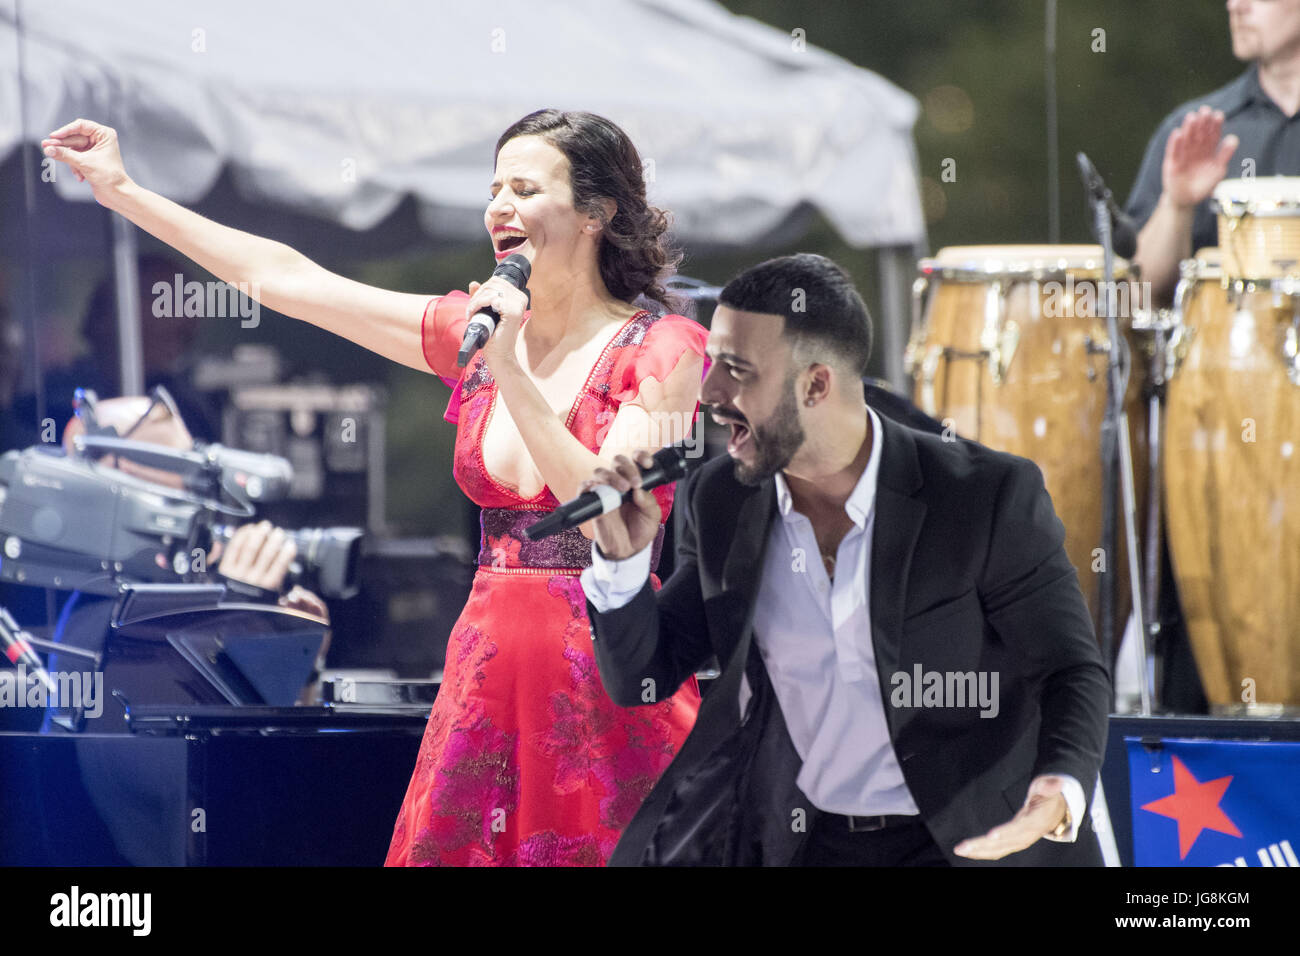 Philadelphia, Pennsylvania, USA. 5th July, 2017. MANDY GONZALEZ, and LUIS FIGUEROA, performing at the Welcome America 4th of July concert on the historic Benjamin Franklin Parkway in Philadelphia PA Gonzalez is currently starring in the hit Broadway musical 'Hamilton' Credit: Ricky Fitchett/ZUMA Wire/Alamy Live News Stock Photo